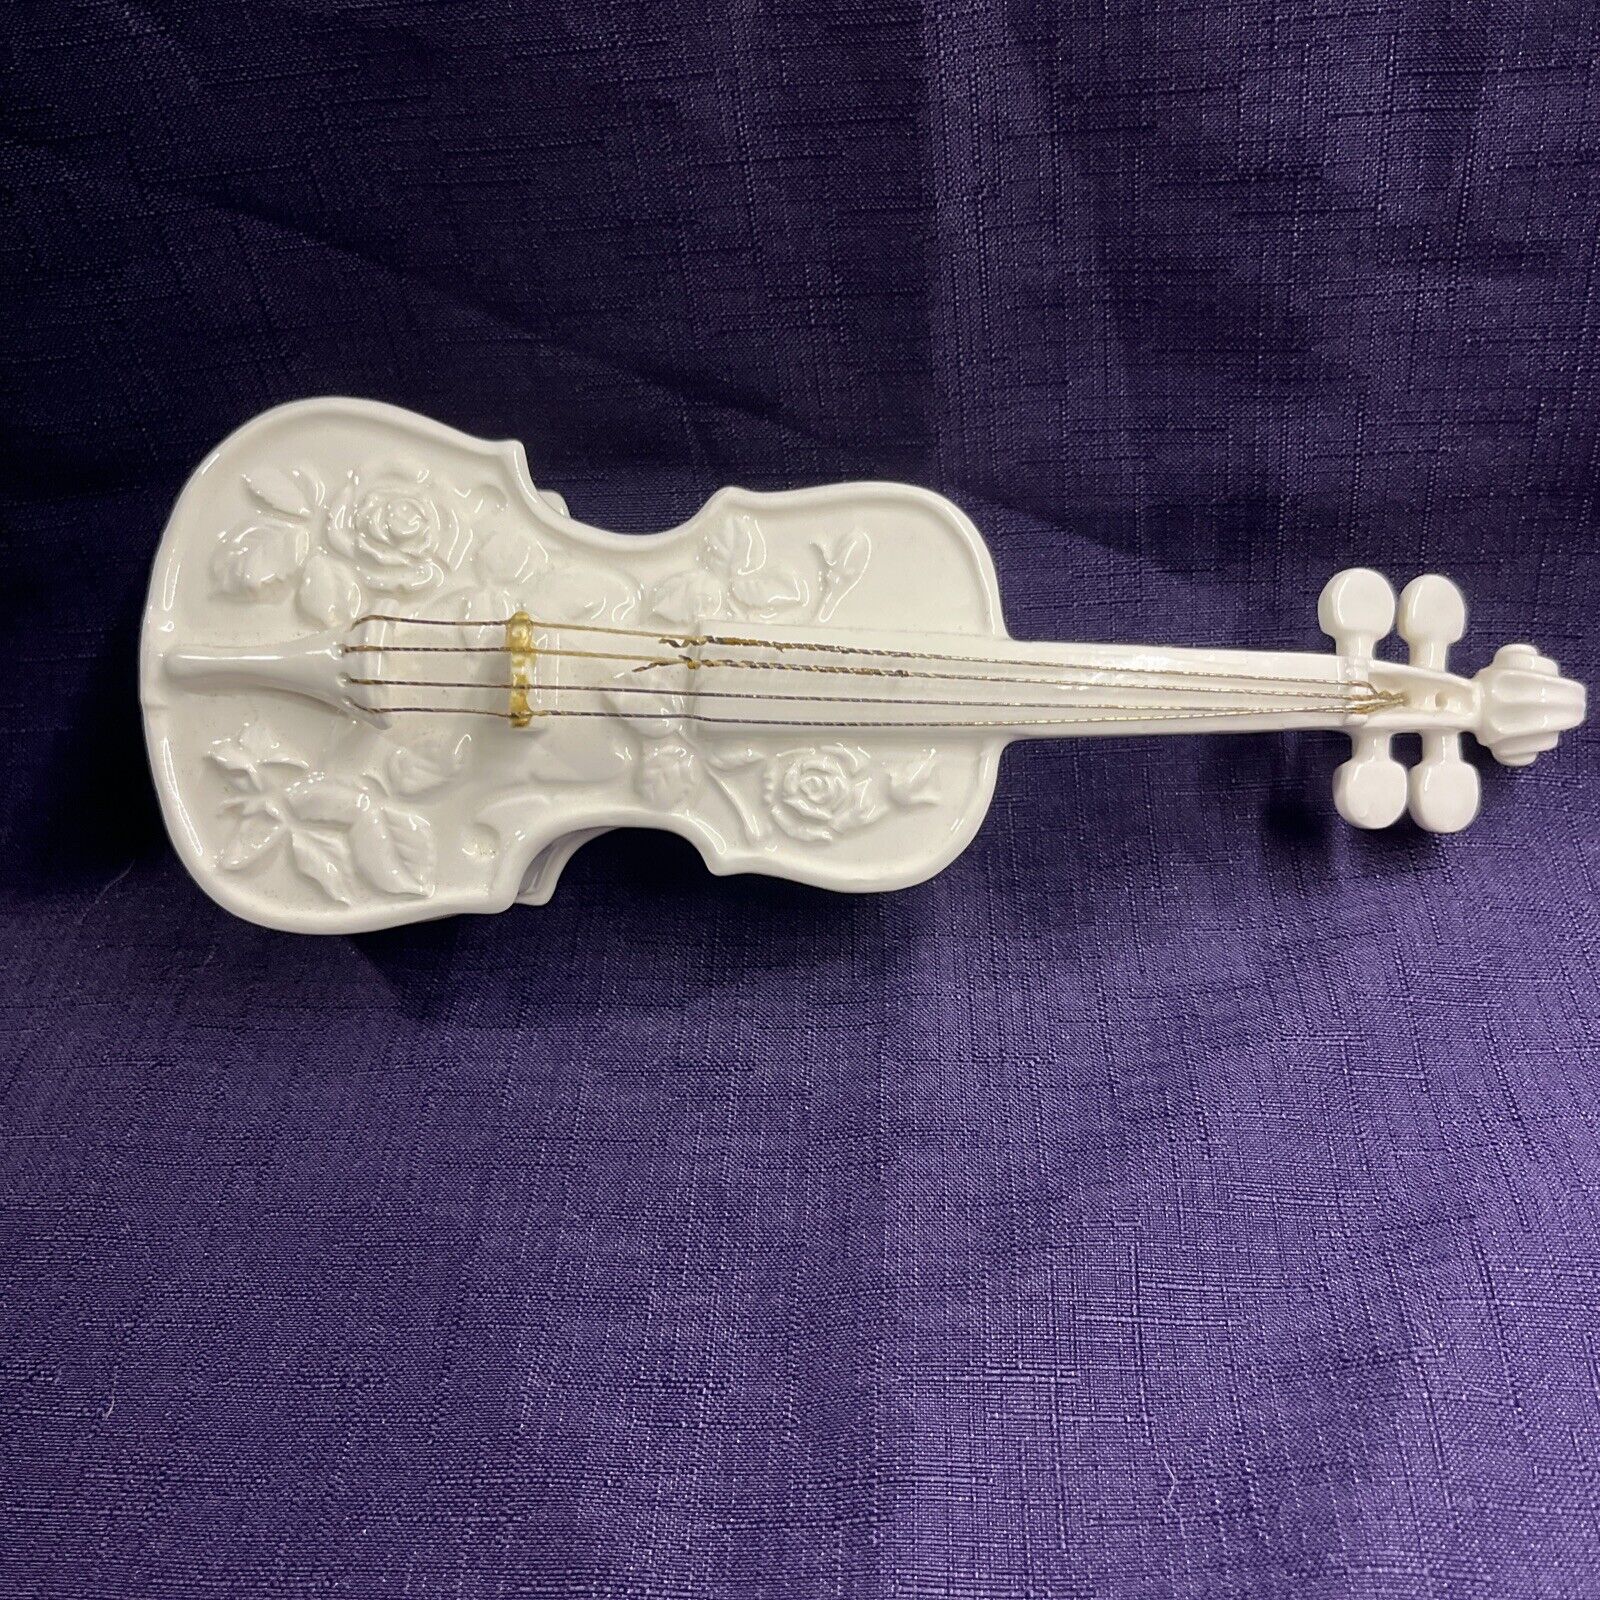 Spanish Style Double Bass White Guitar With Floral Decor Wall Pocket Planter 10”